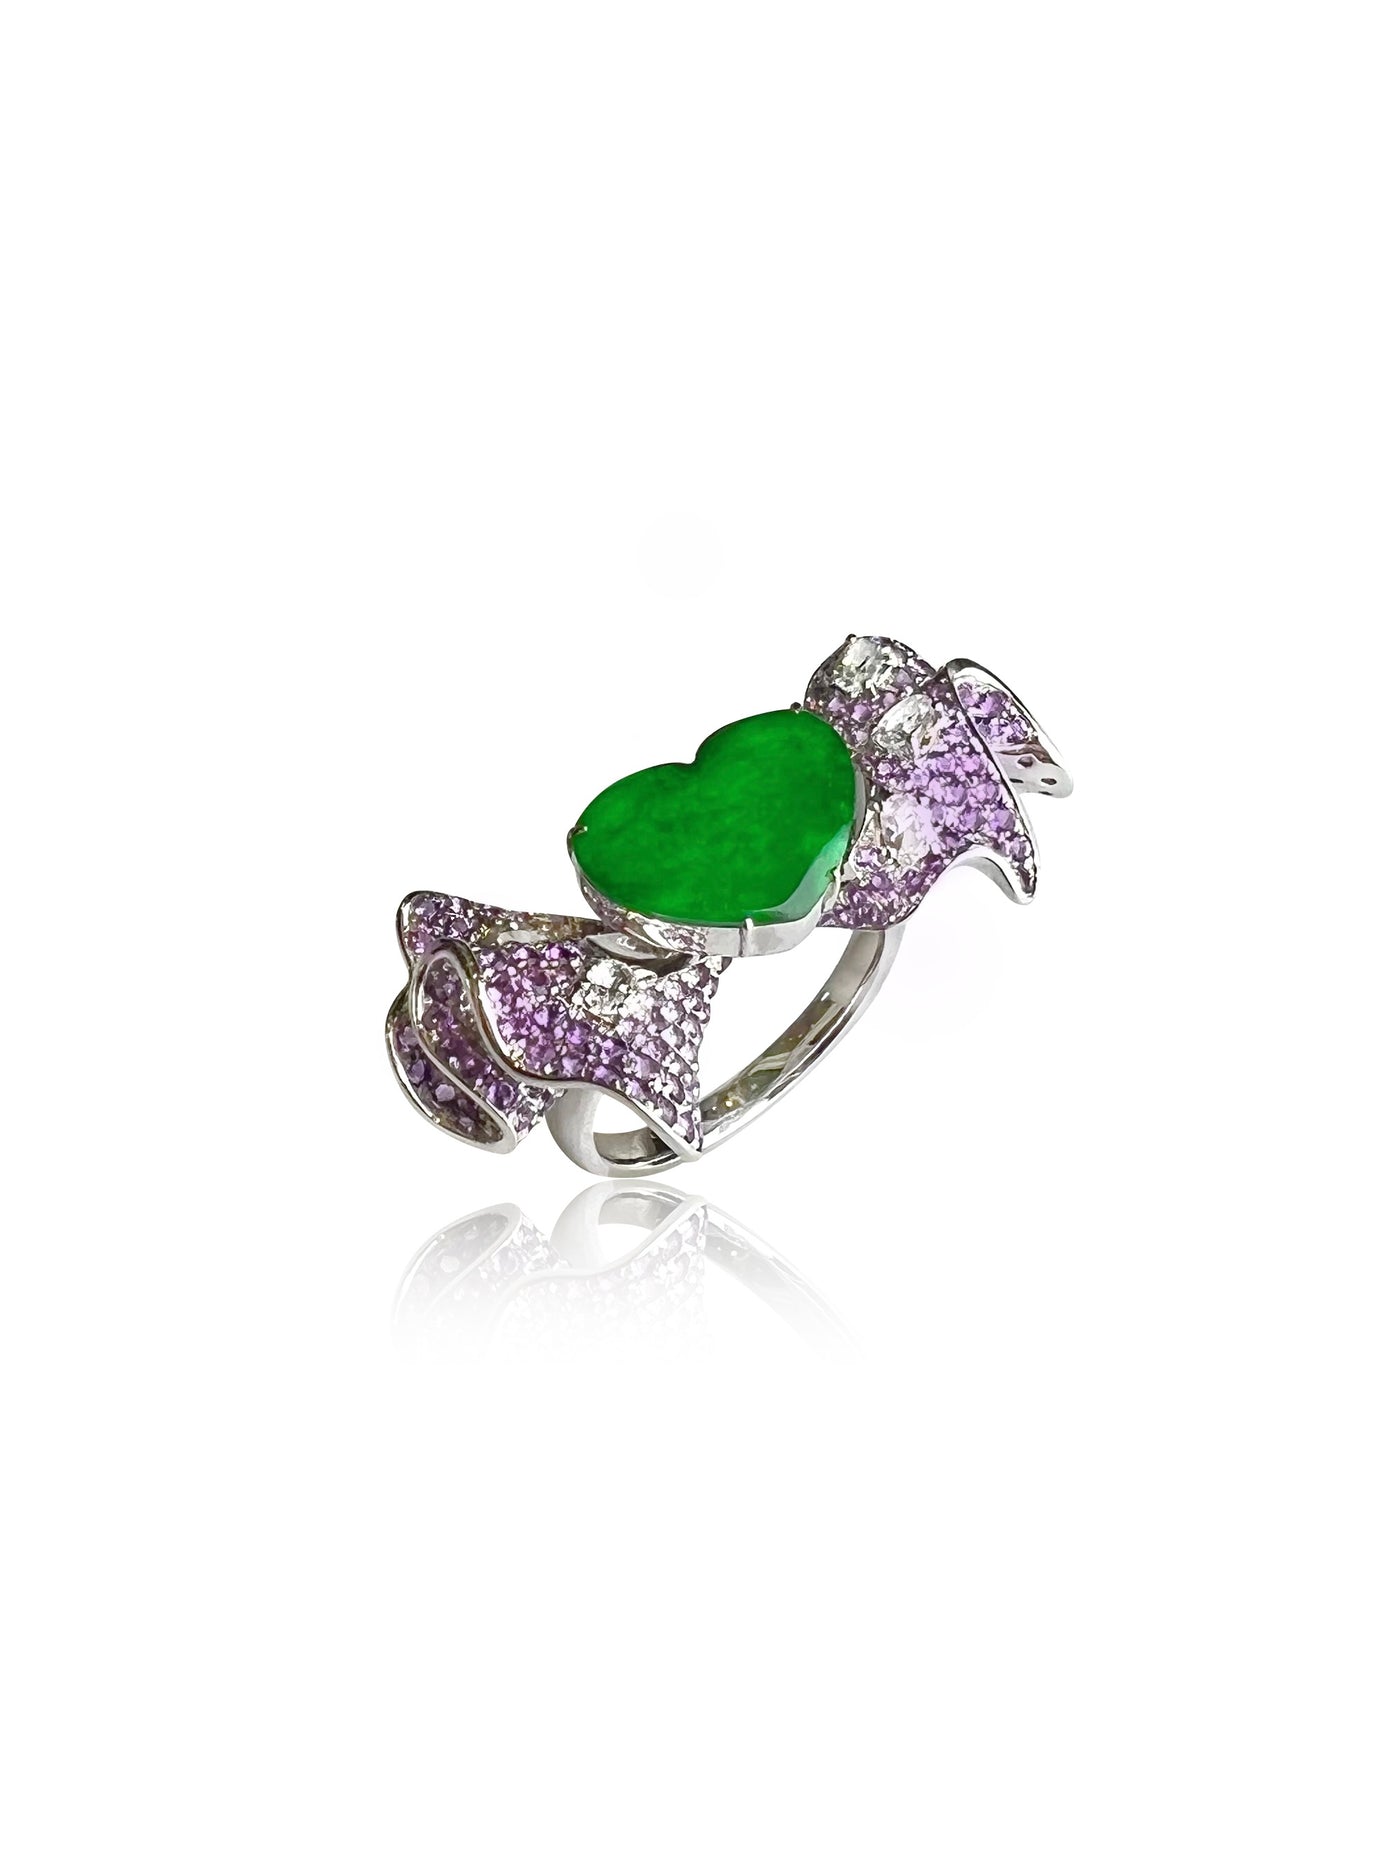 18K WHITE GOLD HEART SHAPE JADEITE RING WITH DIAMOND AND SAPPHIRE